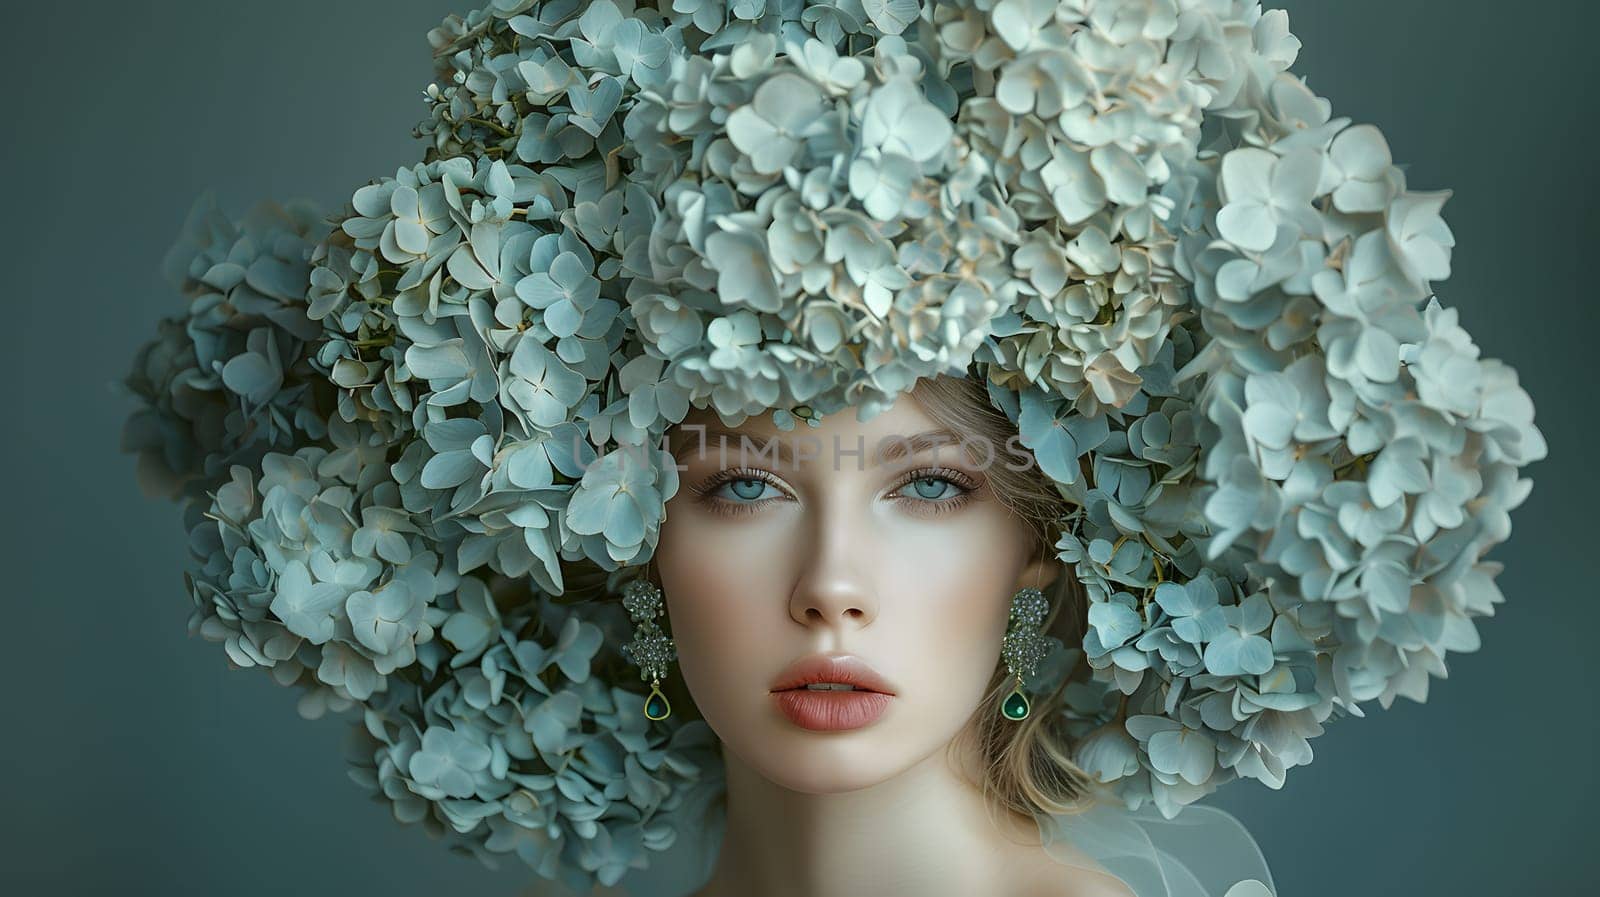 An organism with a large afro made of flowers sits on top of a human body. The eyelashes of the woman are covered in petals, resembling a blooming tree on her head. A gesture of nature and beauty